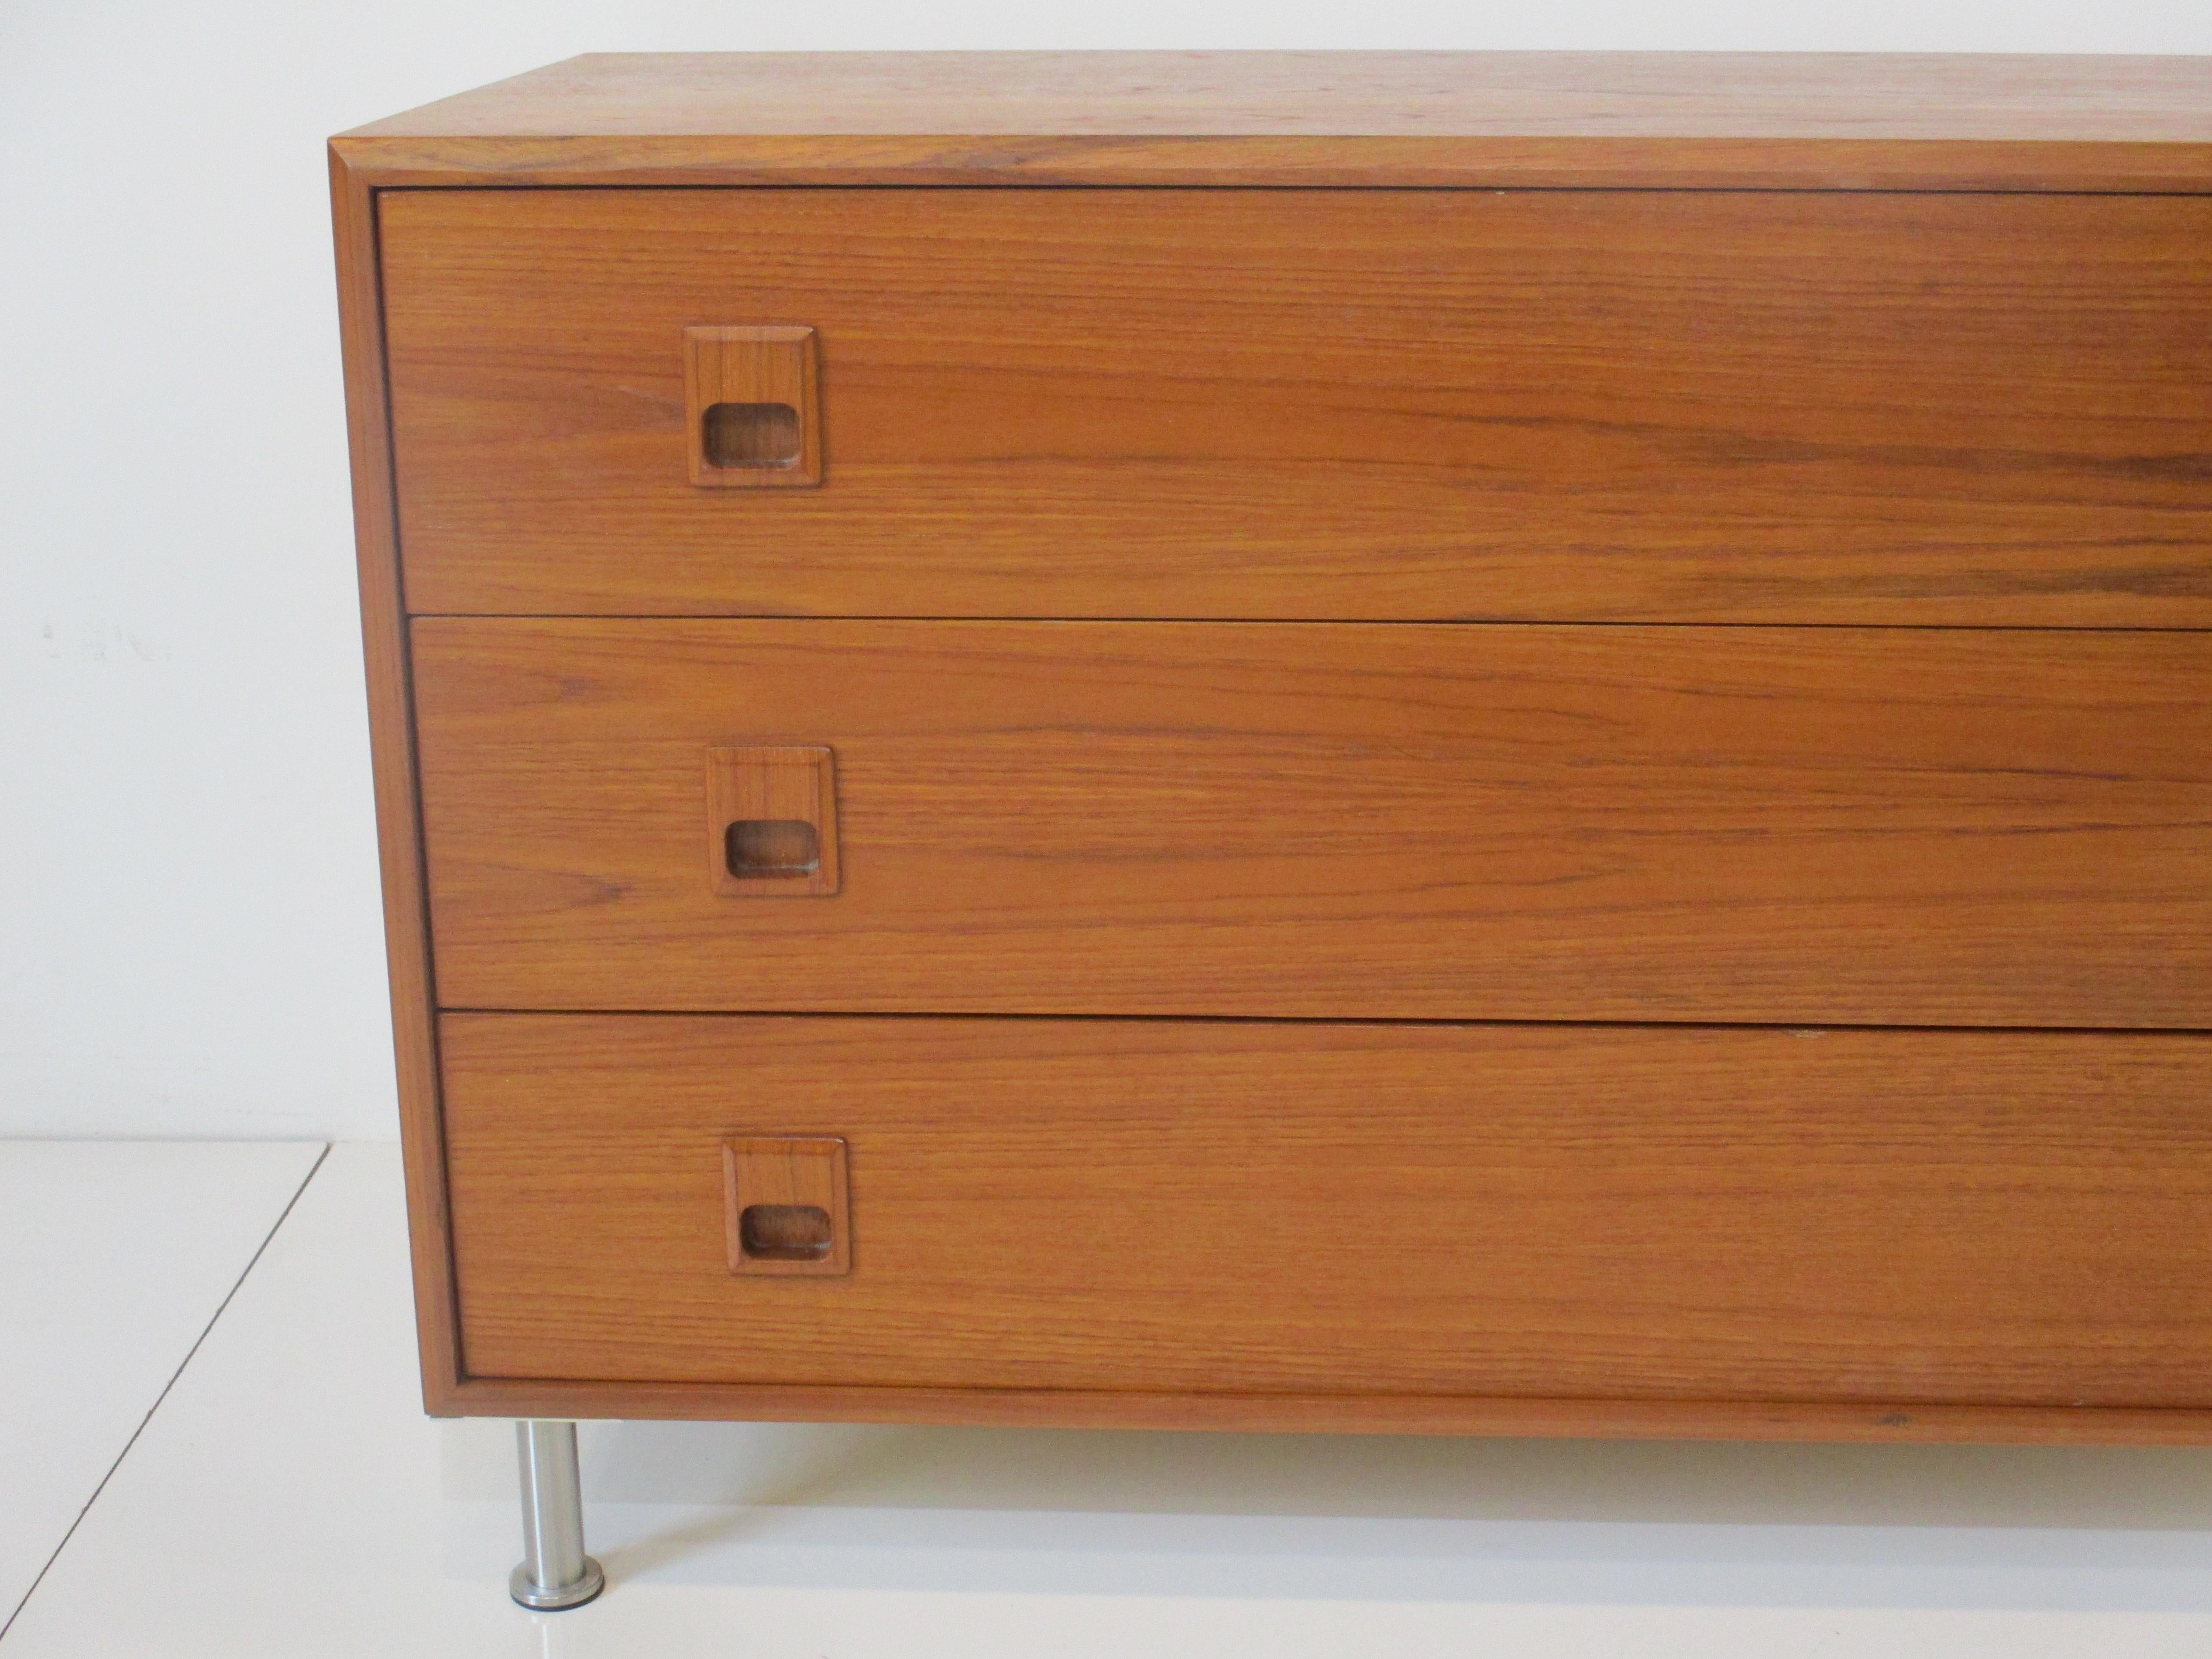 A very well made smaller scaled three drawer teak chest or nightstand with squared pulls to the face . Sitting on adjustable brushed stainless steel legs with protective foot pads for your floors manufactured in Canada in the manner of Arne Vodder .